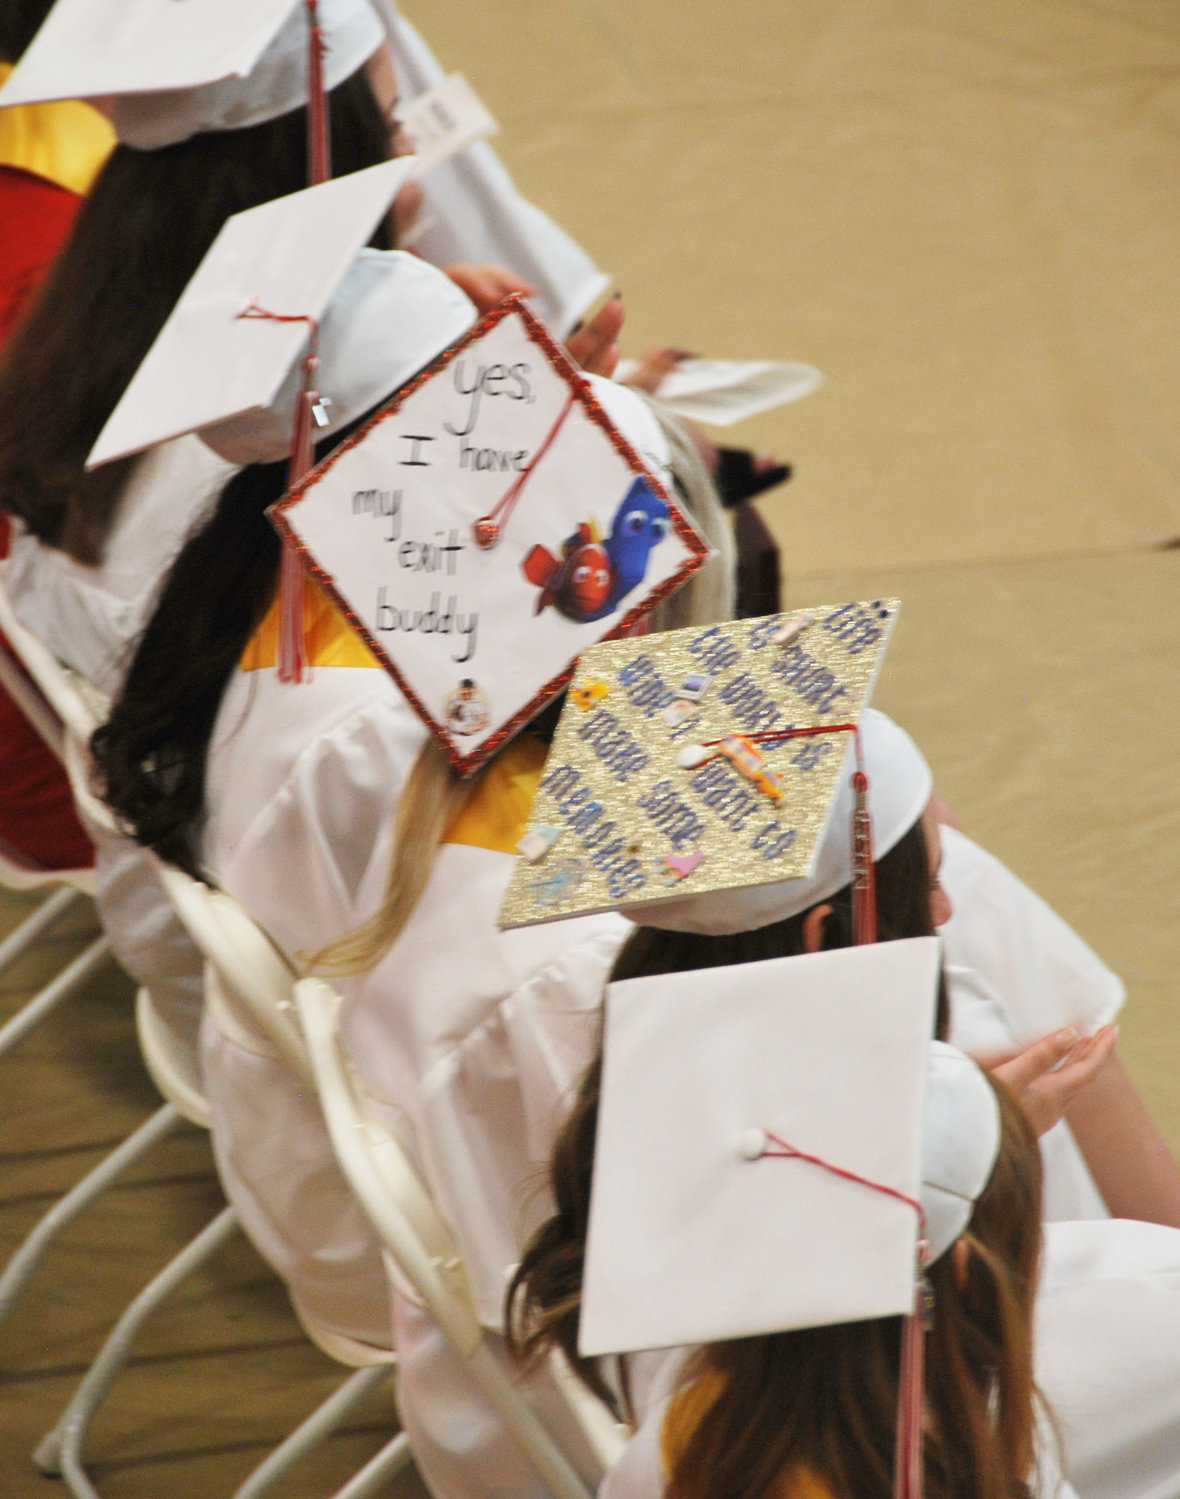 Words of wisdom from some Washington Warrior graduates during last Saturday’s commencement exercises.